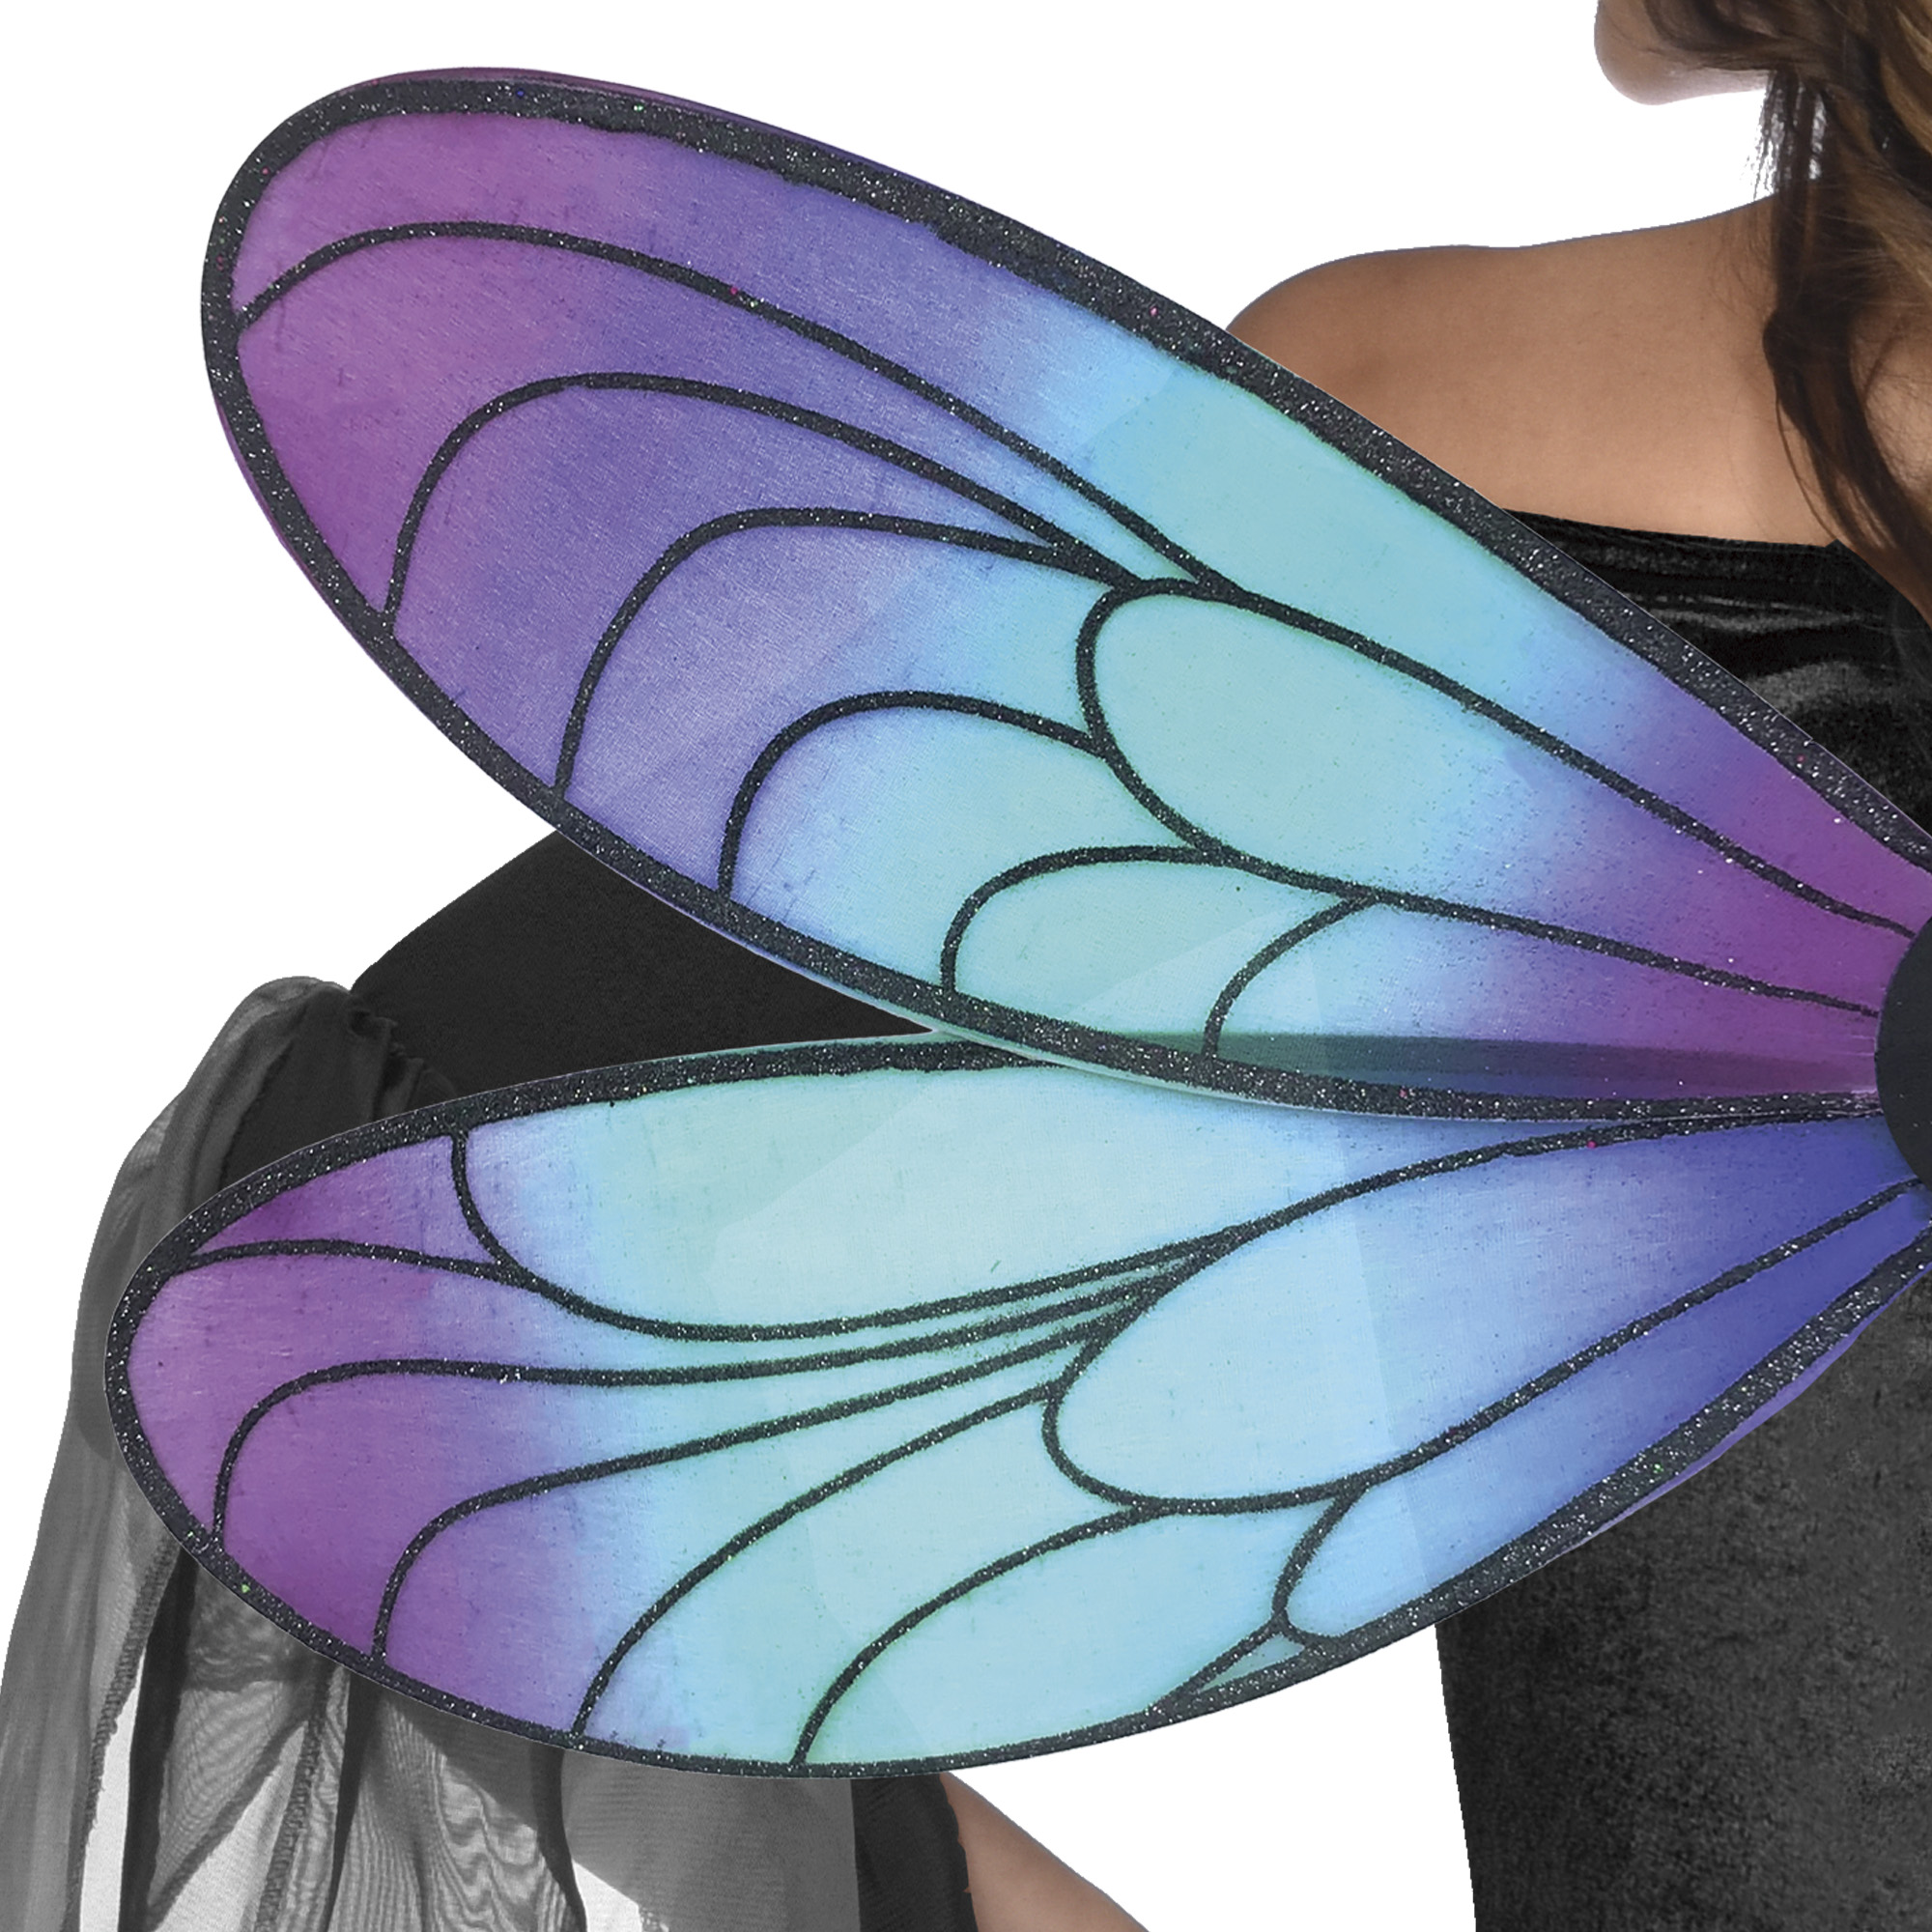 Halloween Women's Dragonfly Wings Costume Accessory, by Way to Celebrate, One Size - image 2 of 6